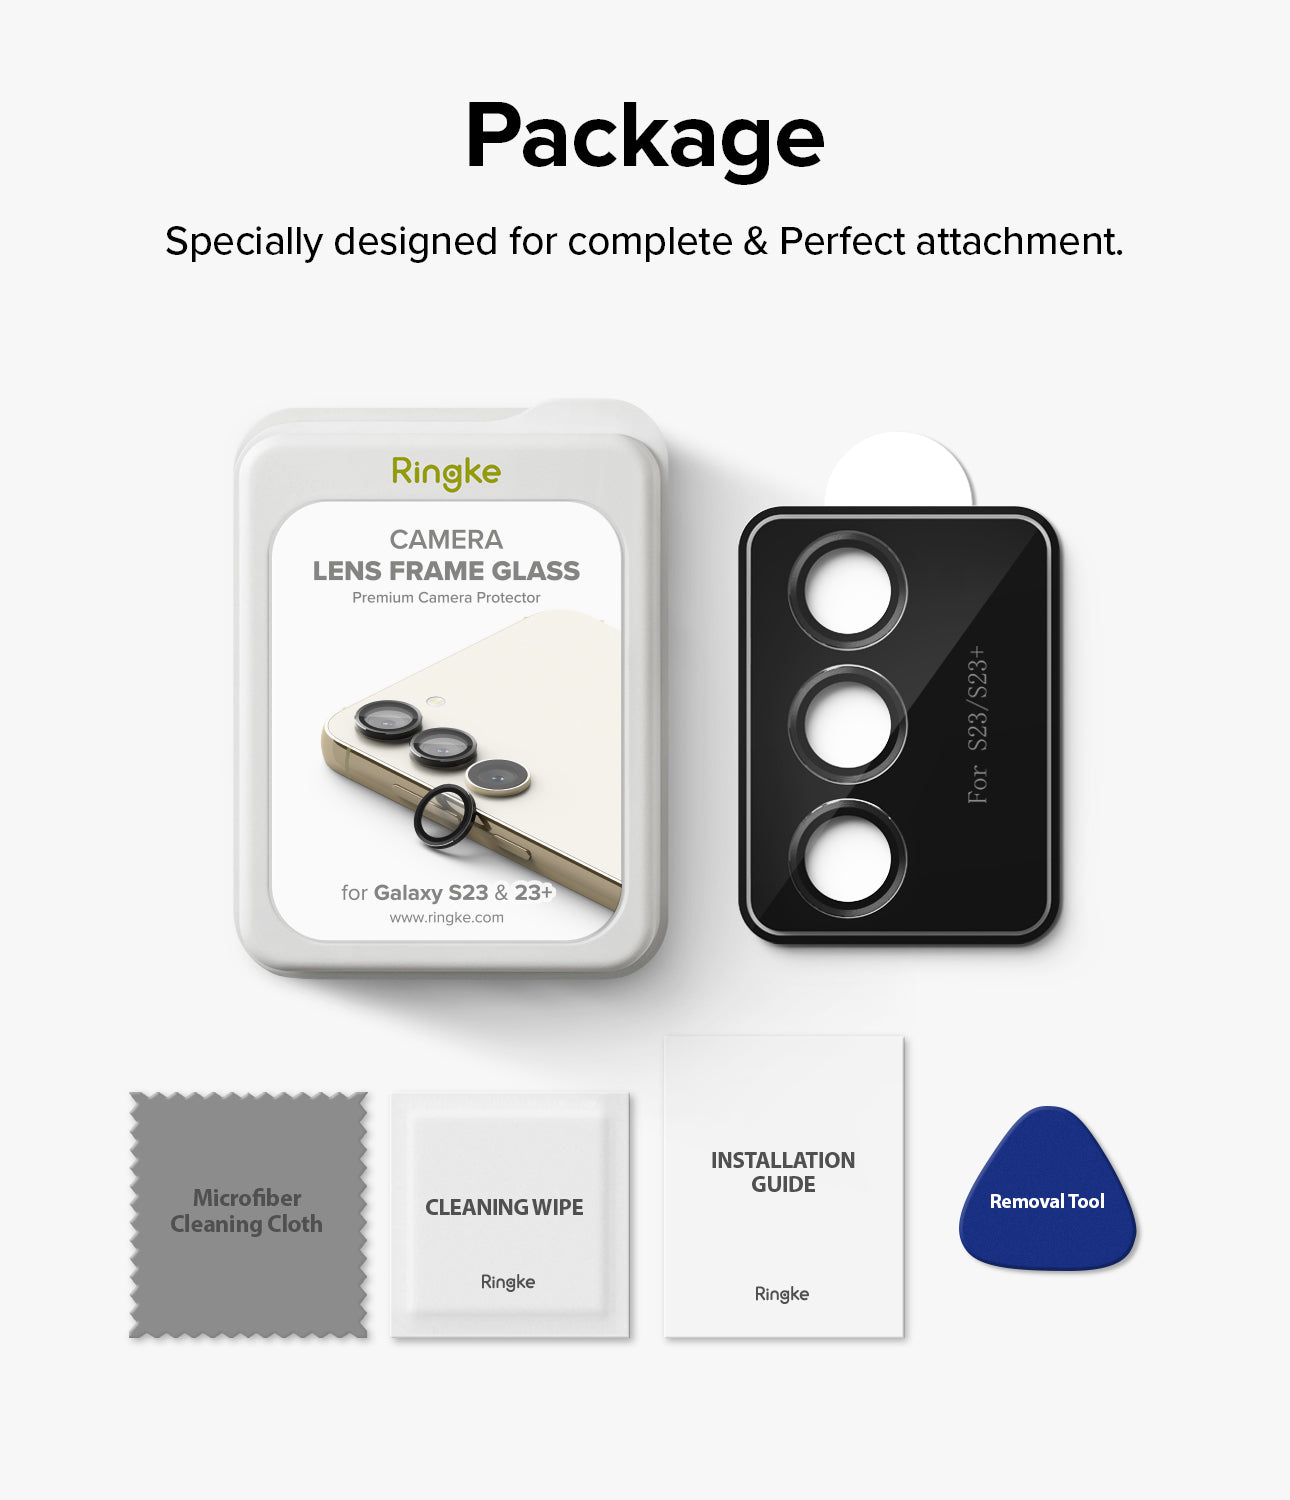 Package Contents l The Ringke Camera Lens Frame Glass Package contains the following: 1 piece of Camera Protector, 1 Cleaning Wipe, 1 Cleaning Cloth, 1 Dust Removal Sticker, 1 Installation Guide, Removal tool